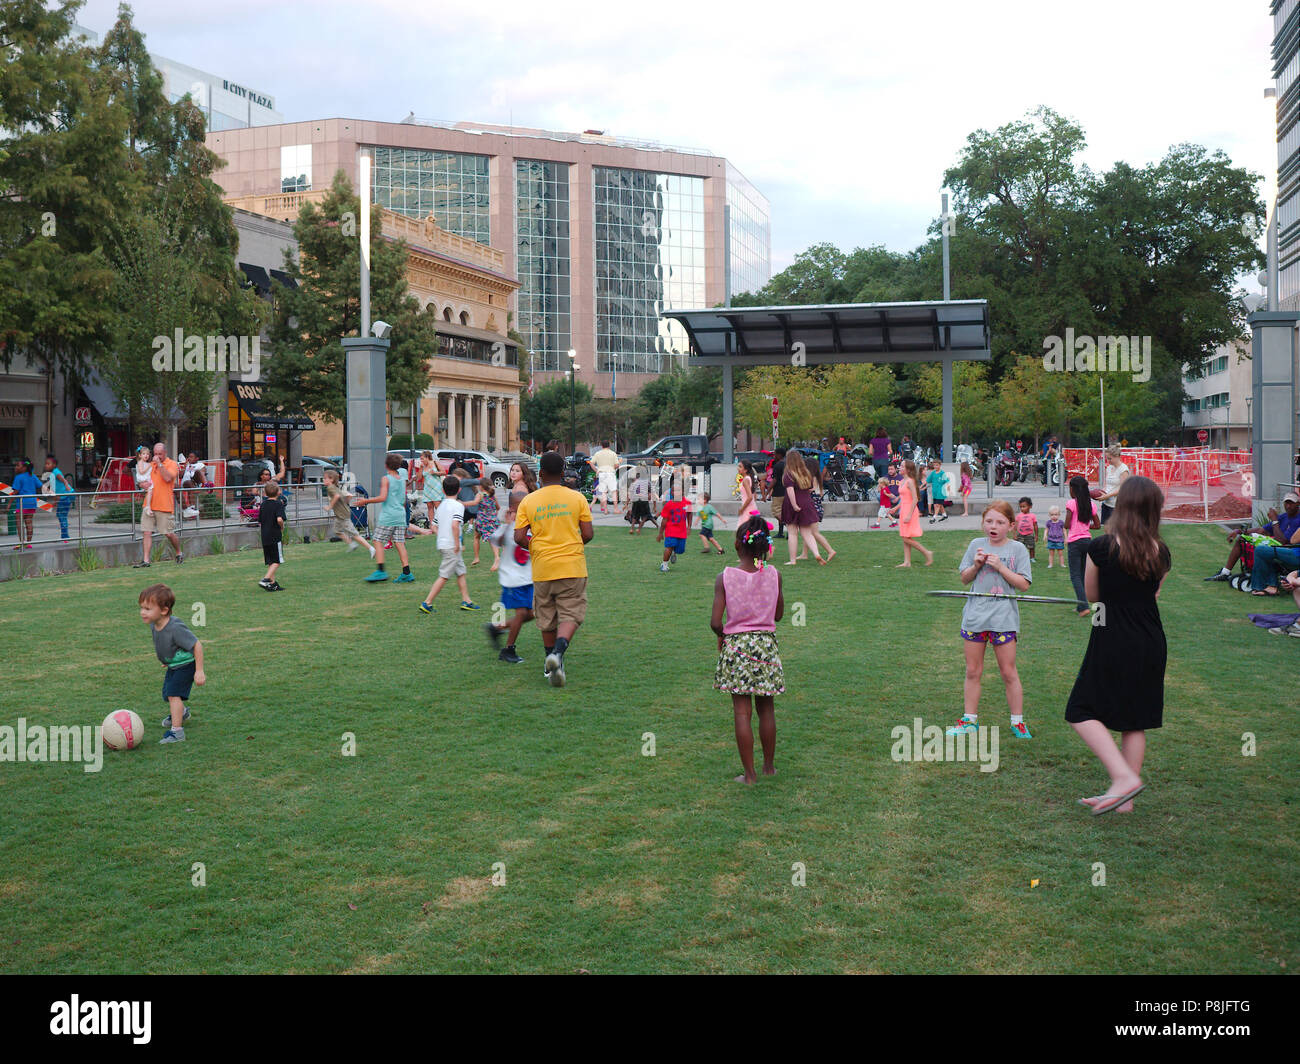 Baton Rouge, Louisiana, USA - 2017: Families enjoy a summer evening at North Boulevard Town Square, located in the Downtown district. Stock Photo